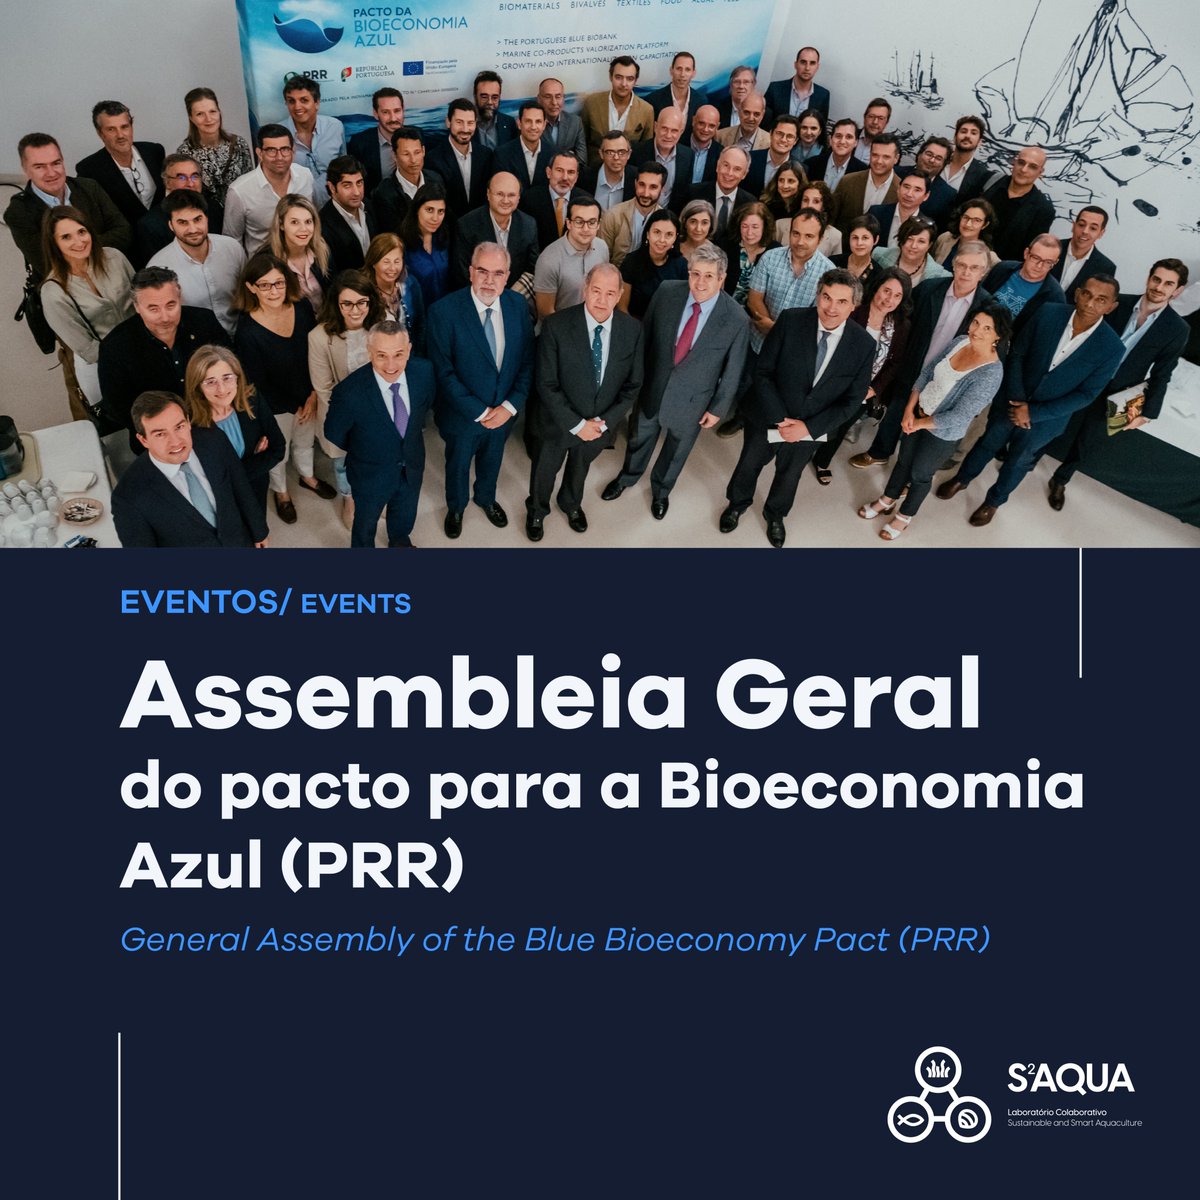 This week, the General Assembly of the Blue Bioeconomy Pact (PRR) took place at the Auditorium of the Lisbon Oceanarium. #S2AQUAcoLAB was represented at this important gathering. Stay tuned for more updates on the outcomes and progress of the #BlueBioeconomy Pact!